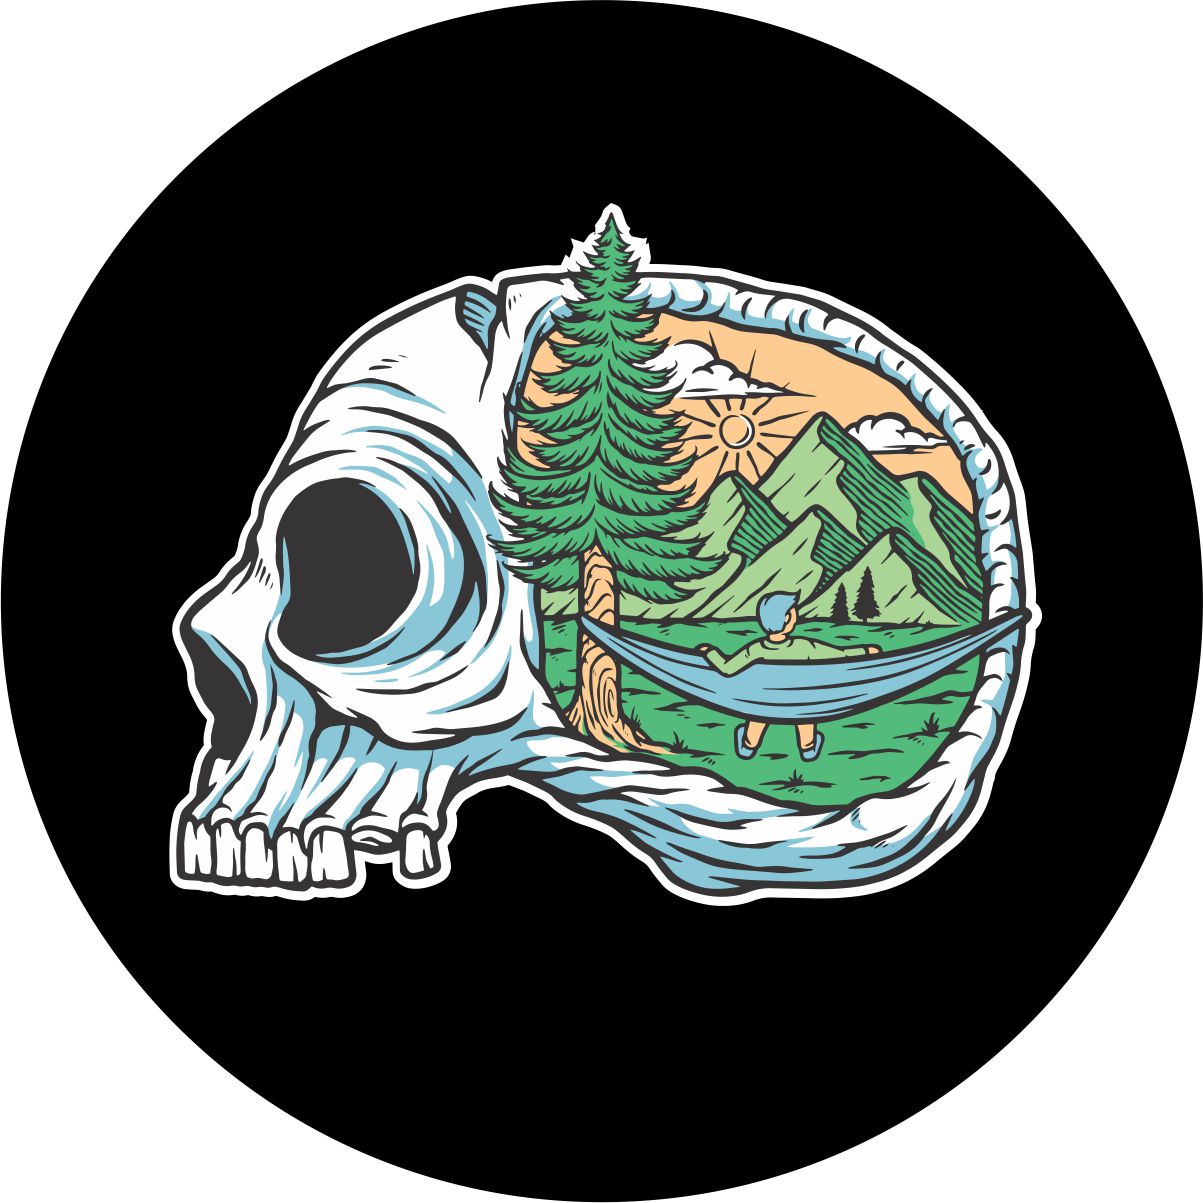 Conceptual, creative, and unique spare tire cover displaying camping until I die. A skull with a camping scene painted into the head of the skull.